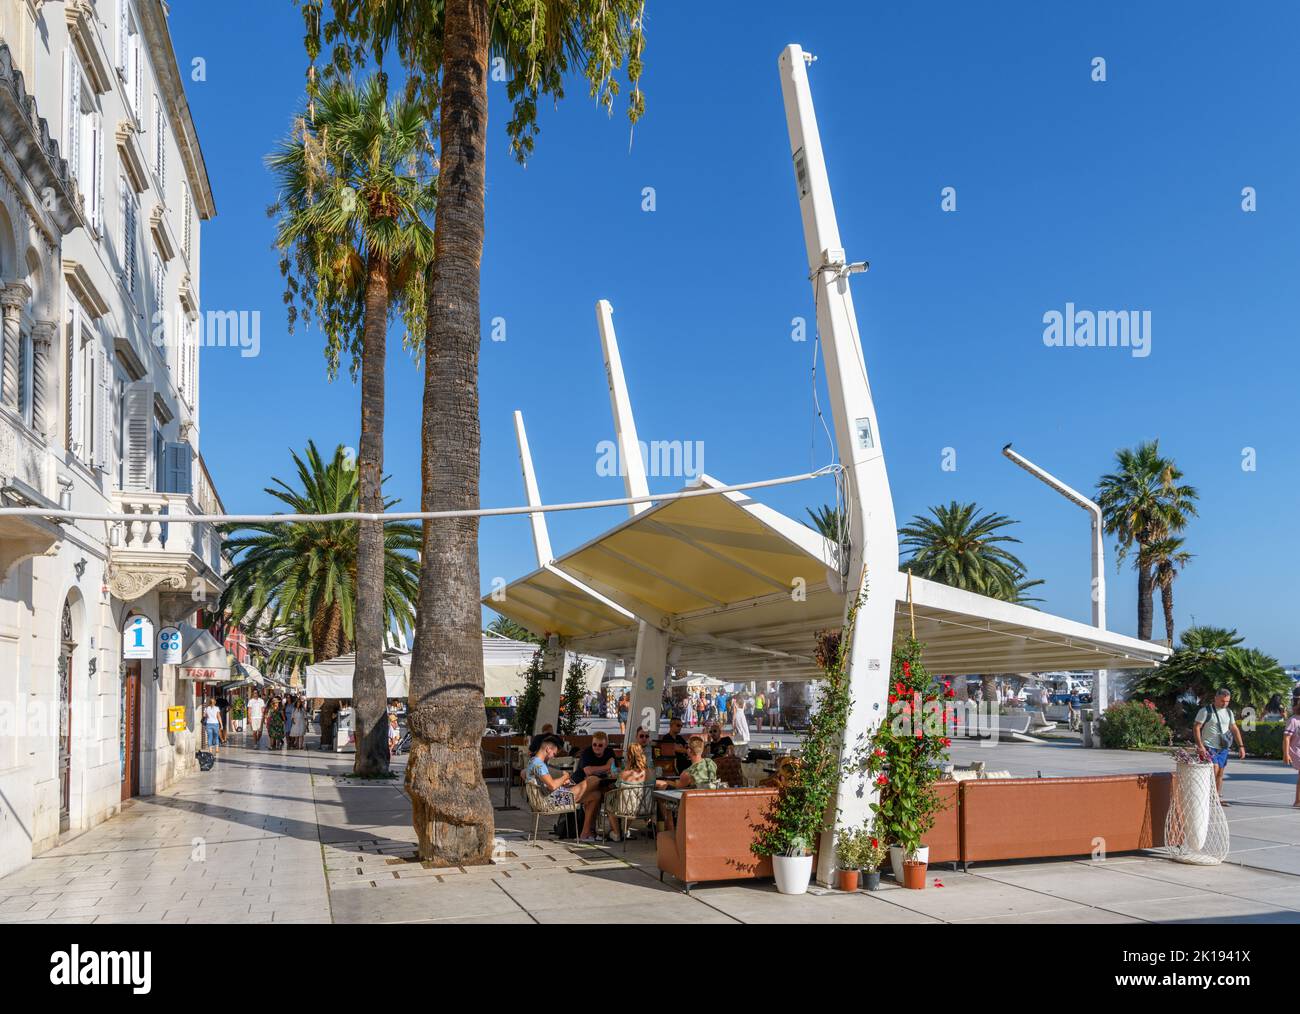 Cafe on the waterfront in the old town of Split, Croatia Stock Photo